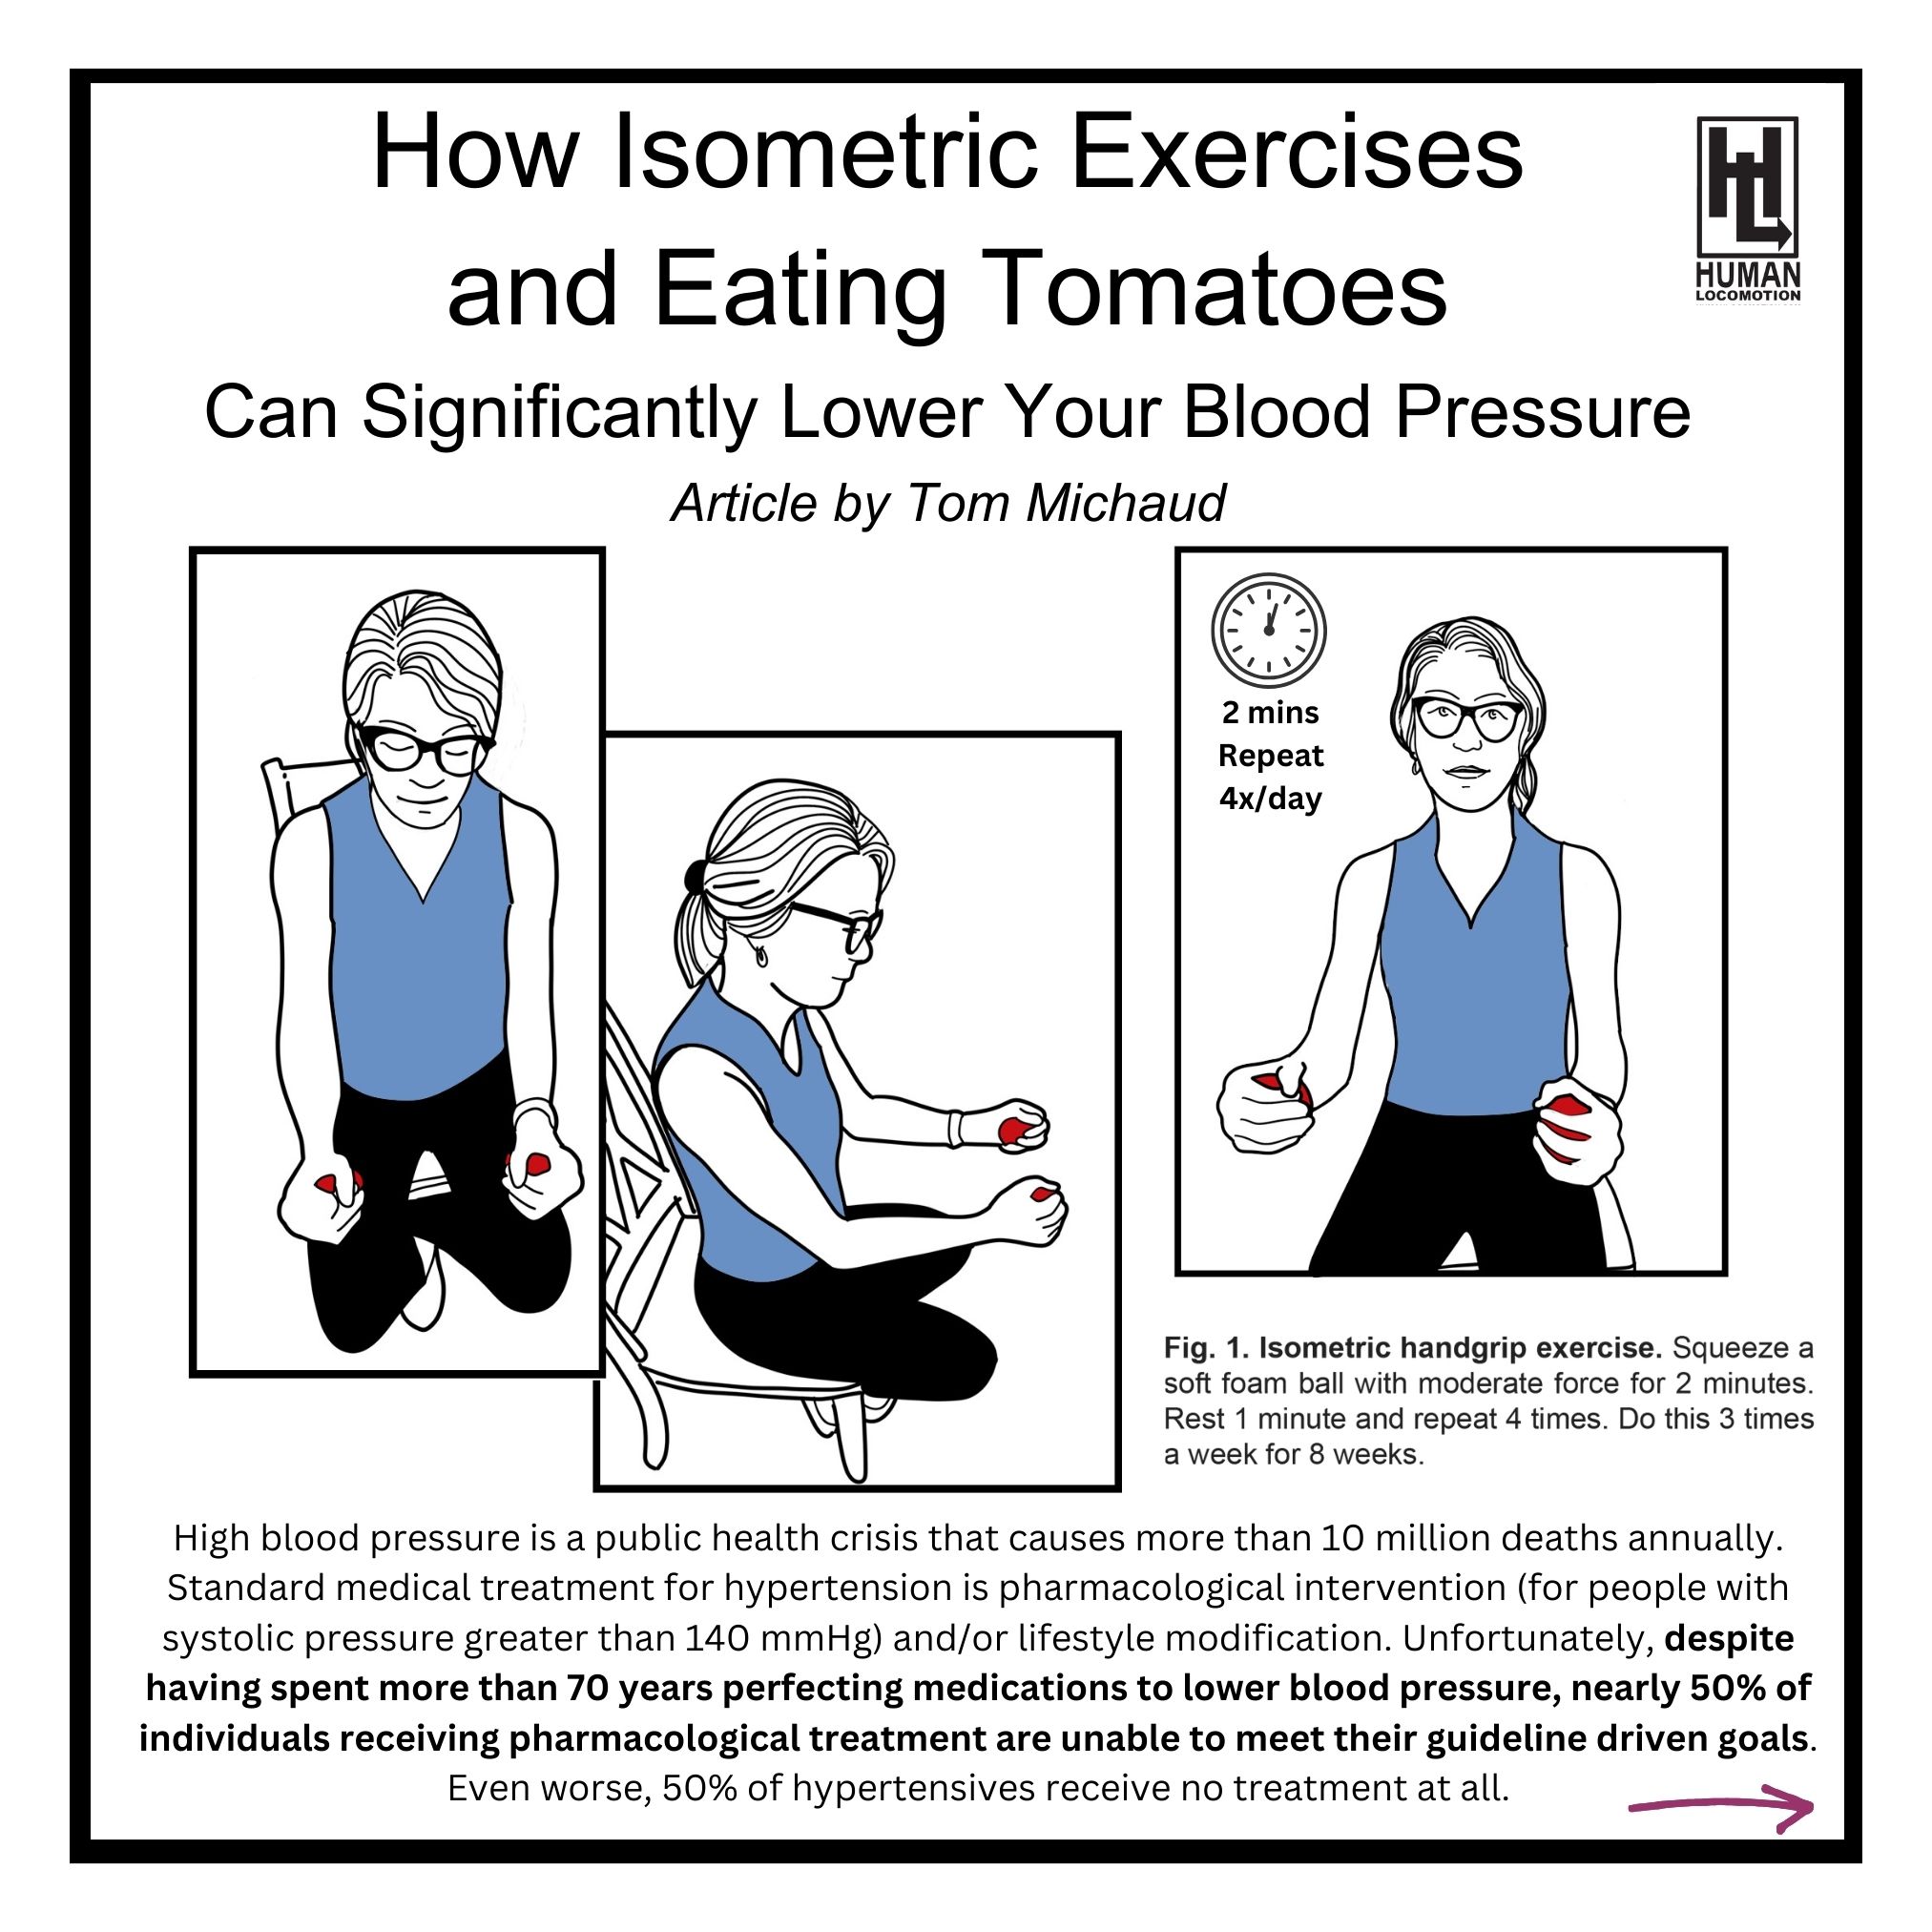 How Isometric Exercises and Eating Tomatoes can Significantly Lower Your Blood Pressure